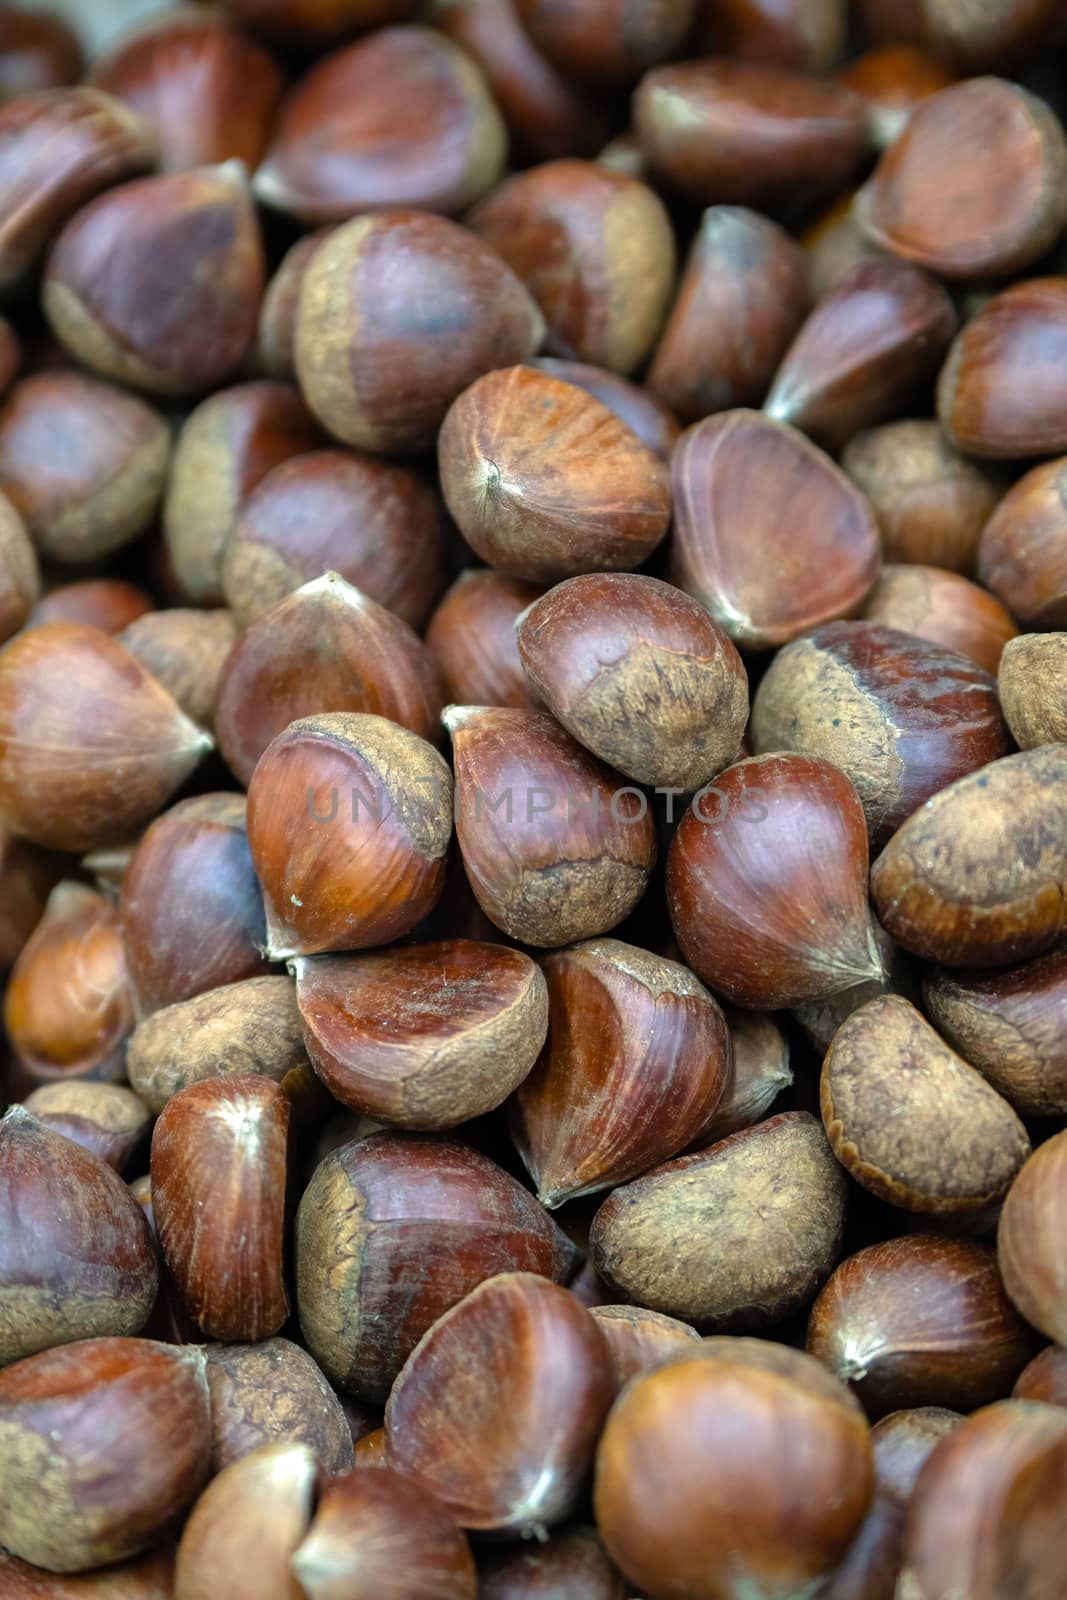 Chestnuts in basket in supermarket, first-person view, closeup